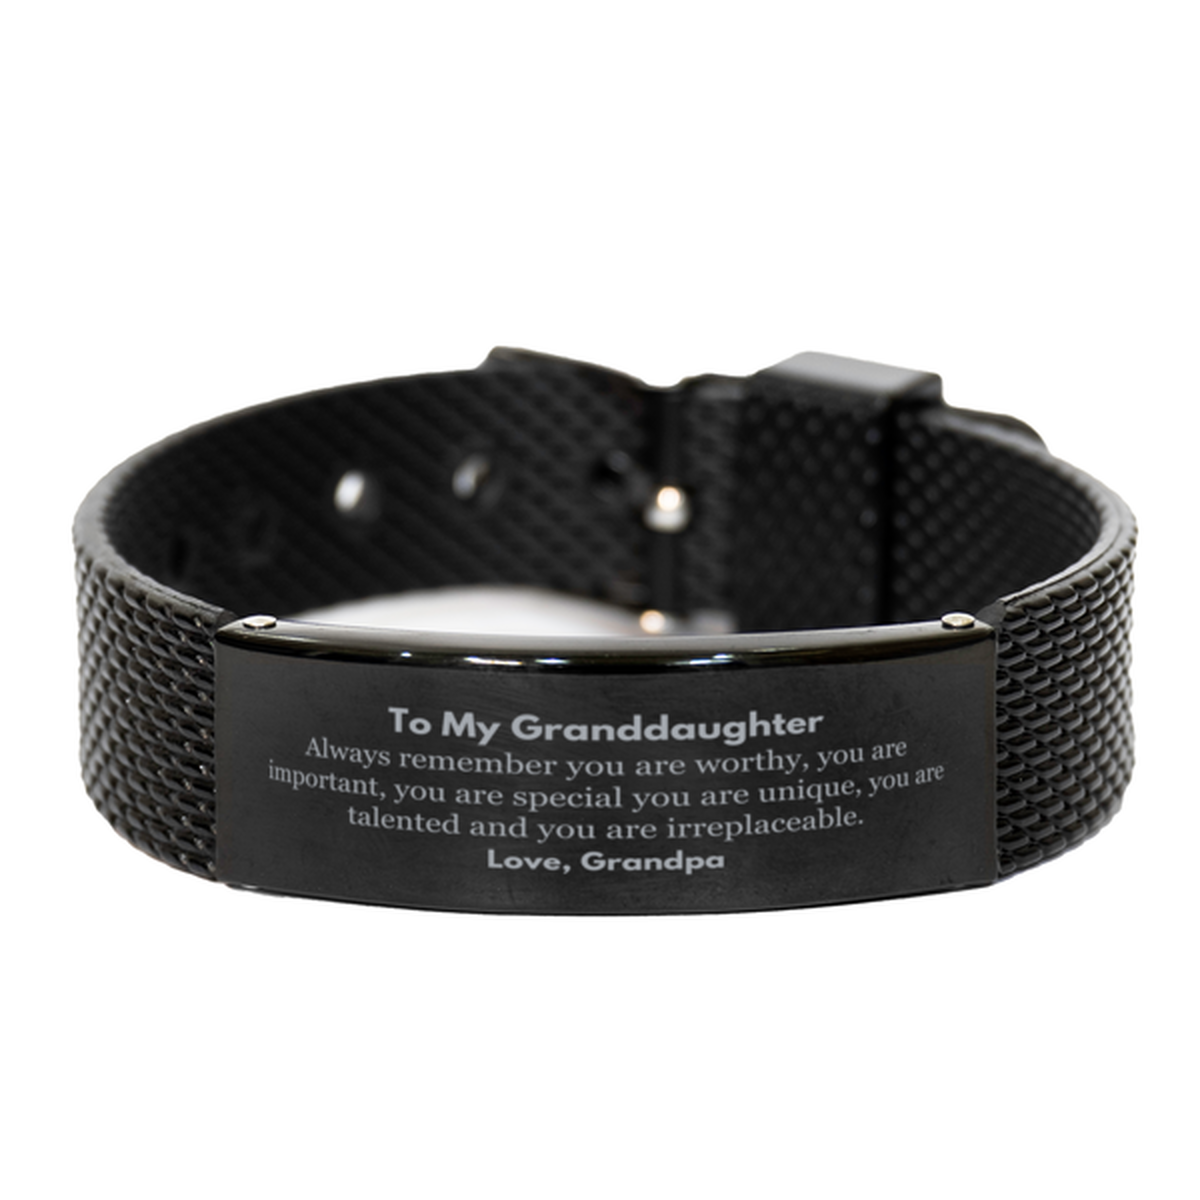 Granddaughter Birthday Gifts from Grandpa, Inspirational Black Shark Mesh Bracelet for Granddaughter Christmas Graduation Gifts for Granddaughter Always remember you are worthy, you are important. Love, Grandpa